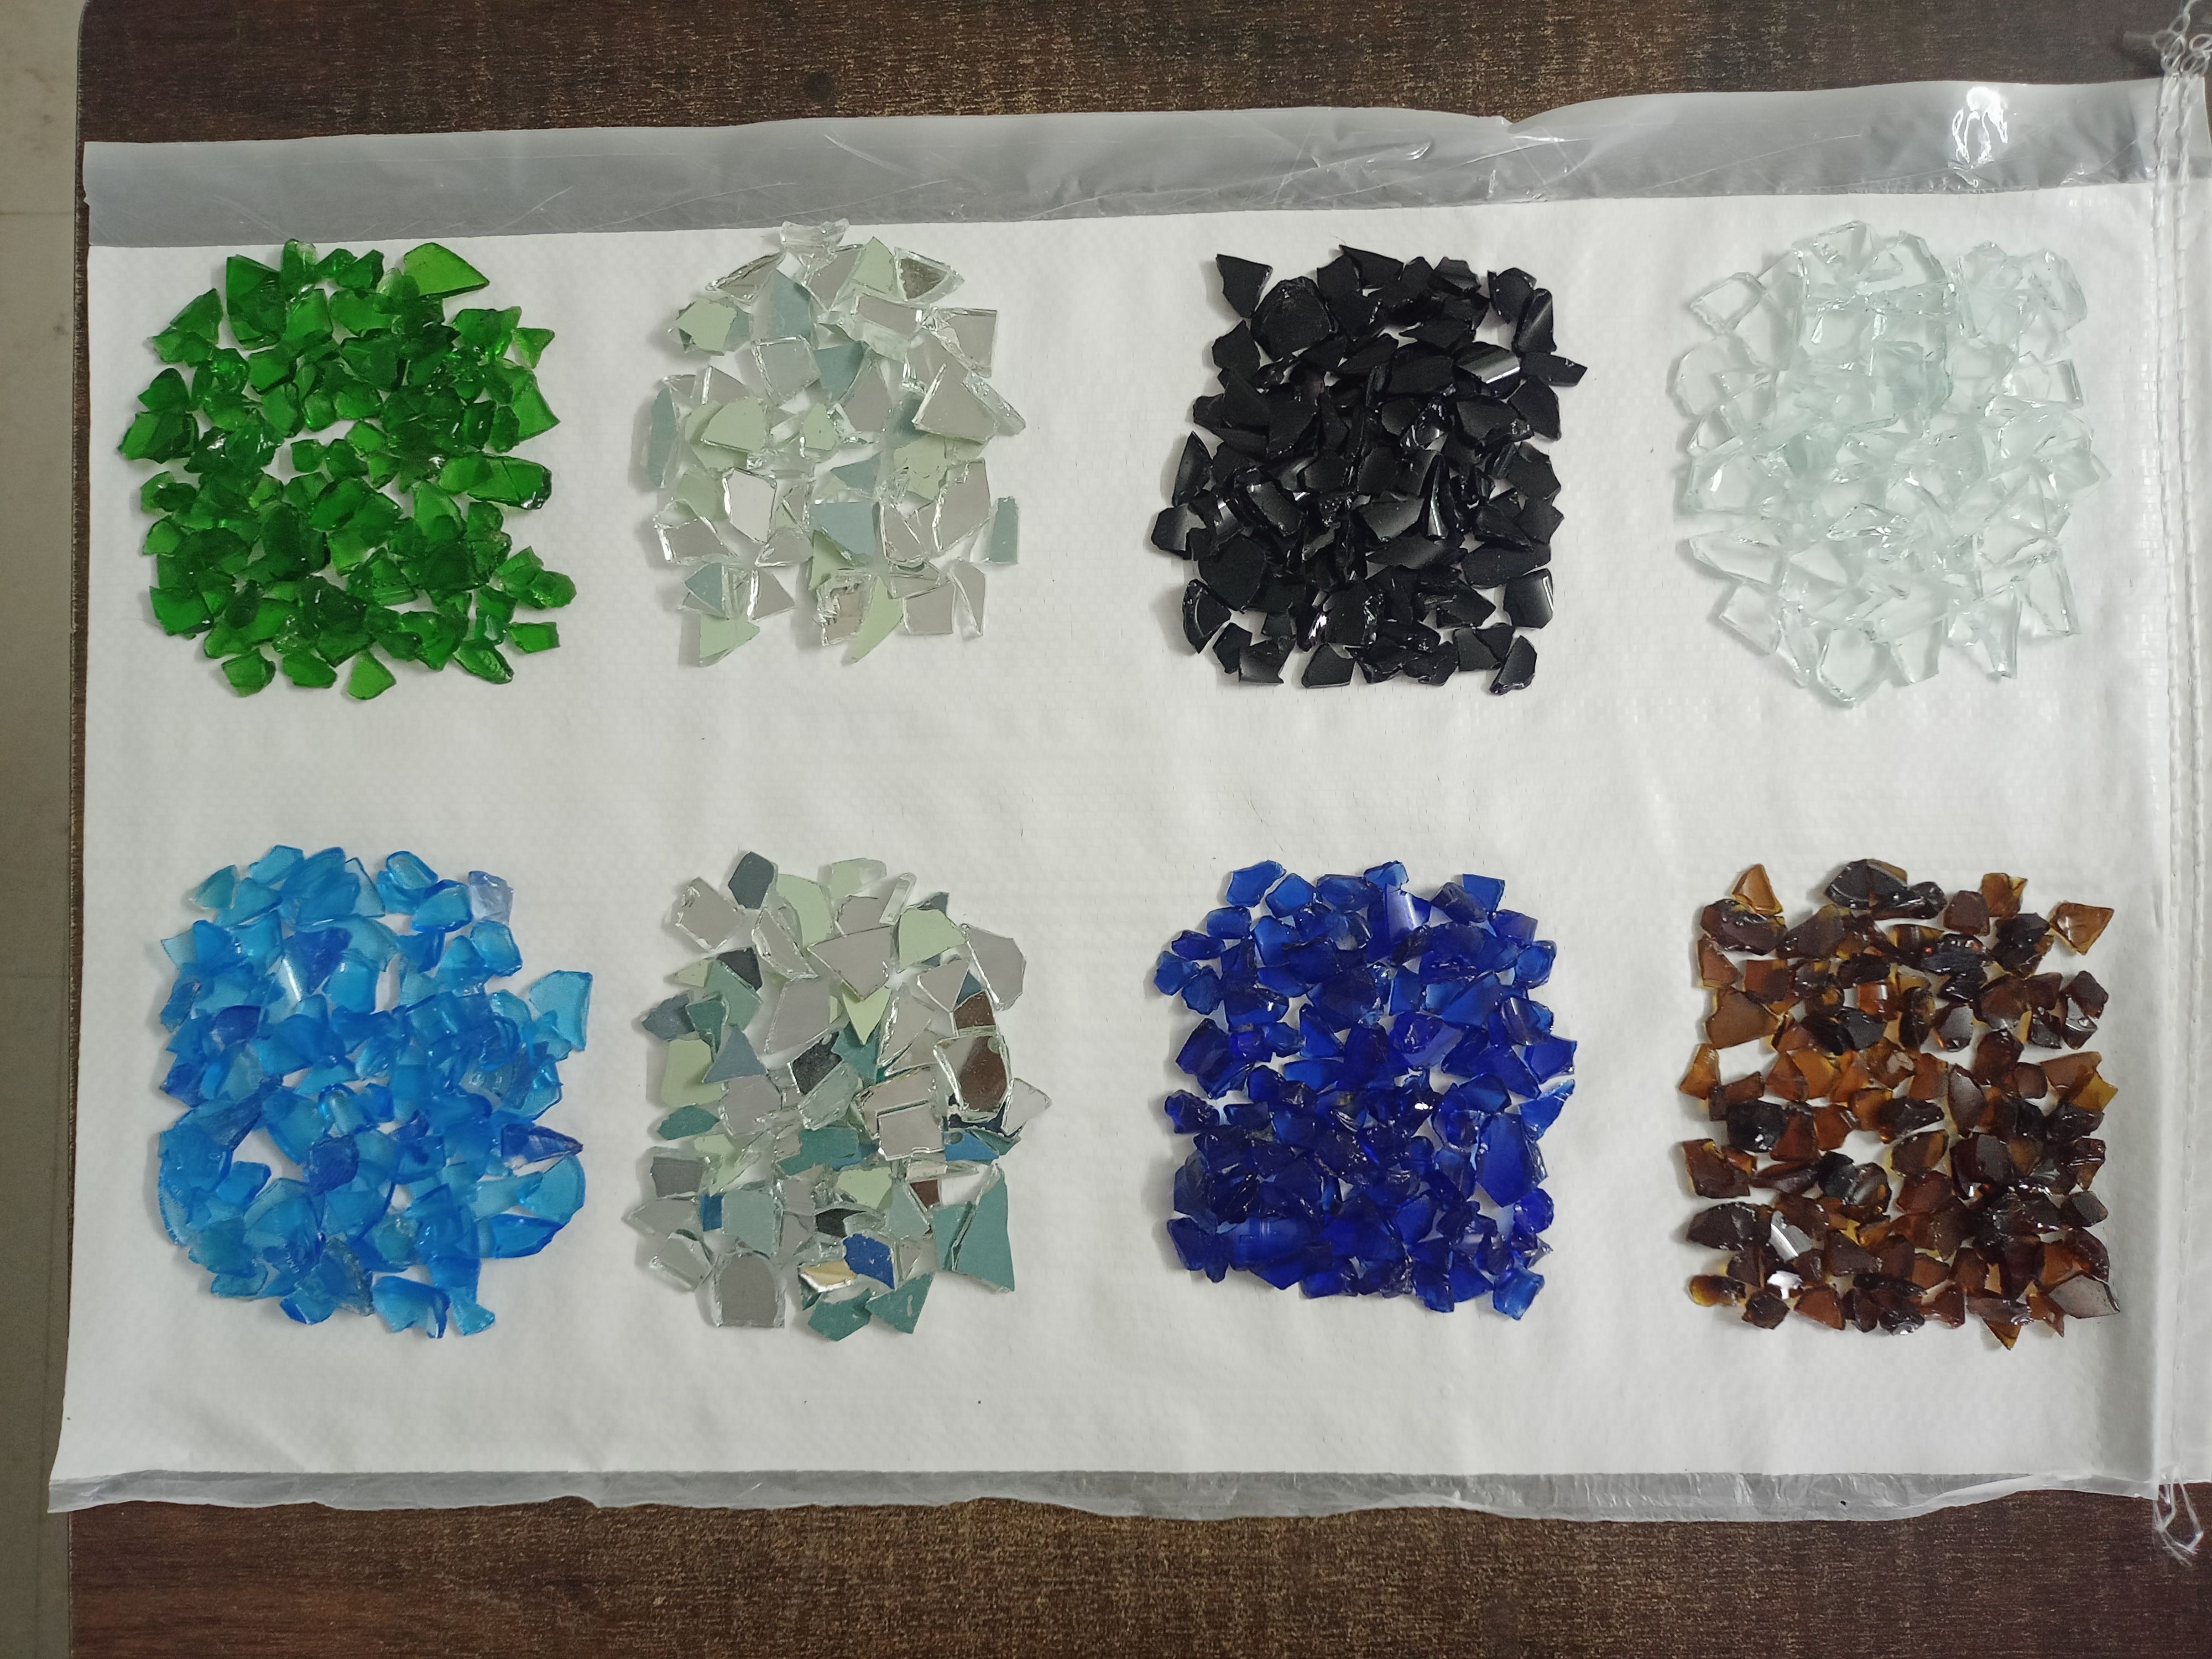 high quality crystal clear glass chips for decoration and micro art work